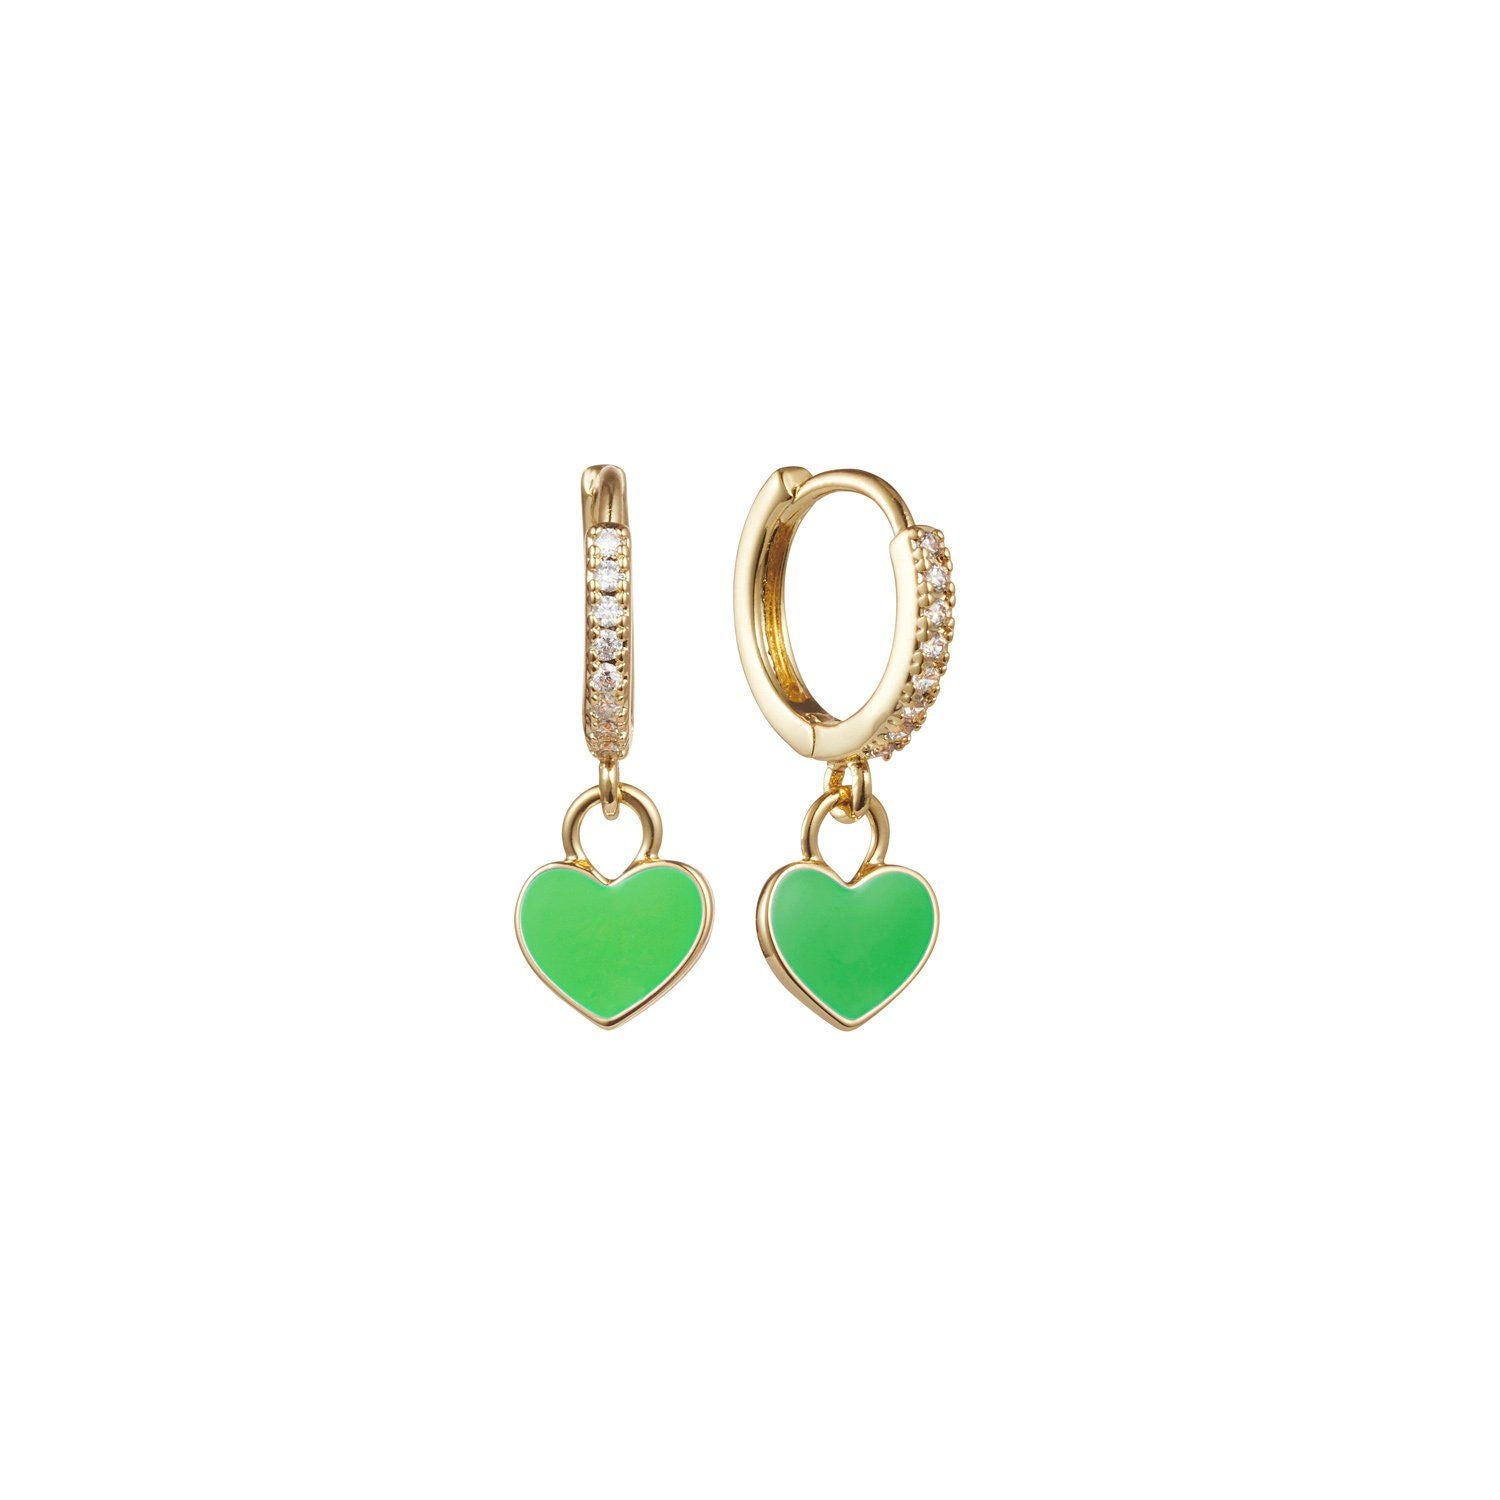 Small gold hoops with green enamel heart pendant